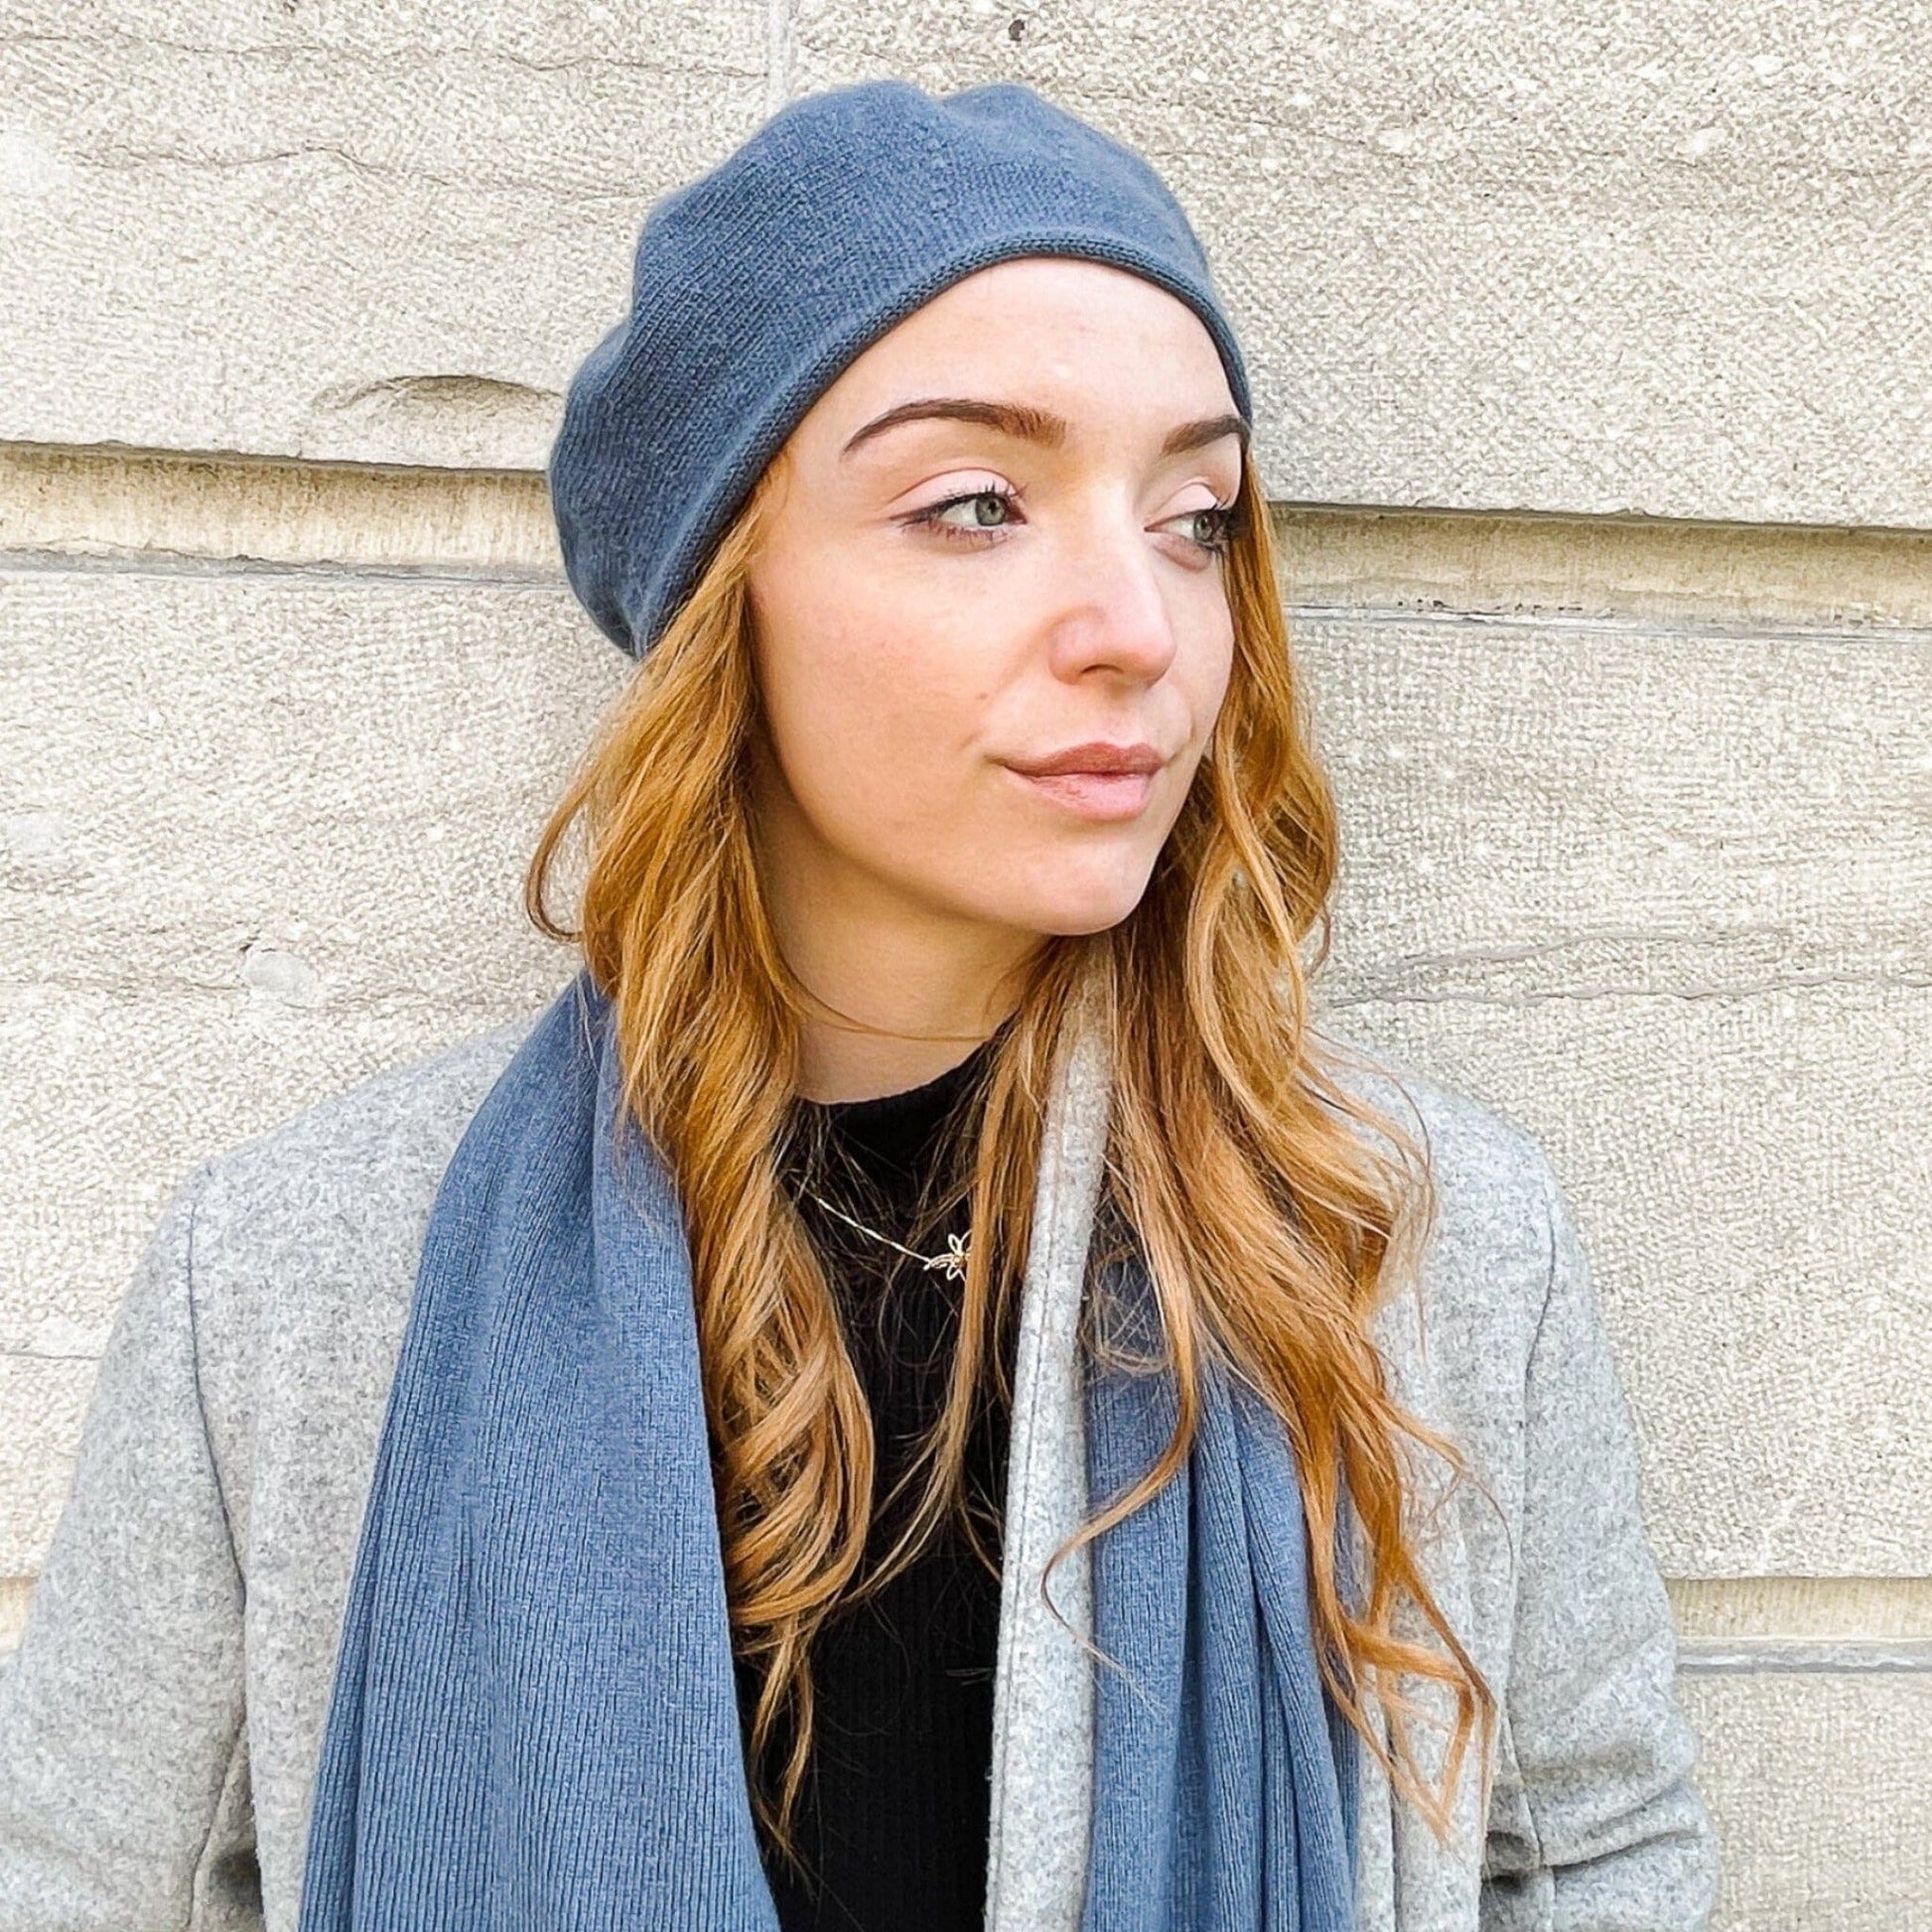 A woman wearing a blue cashmere beret and scarf